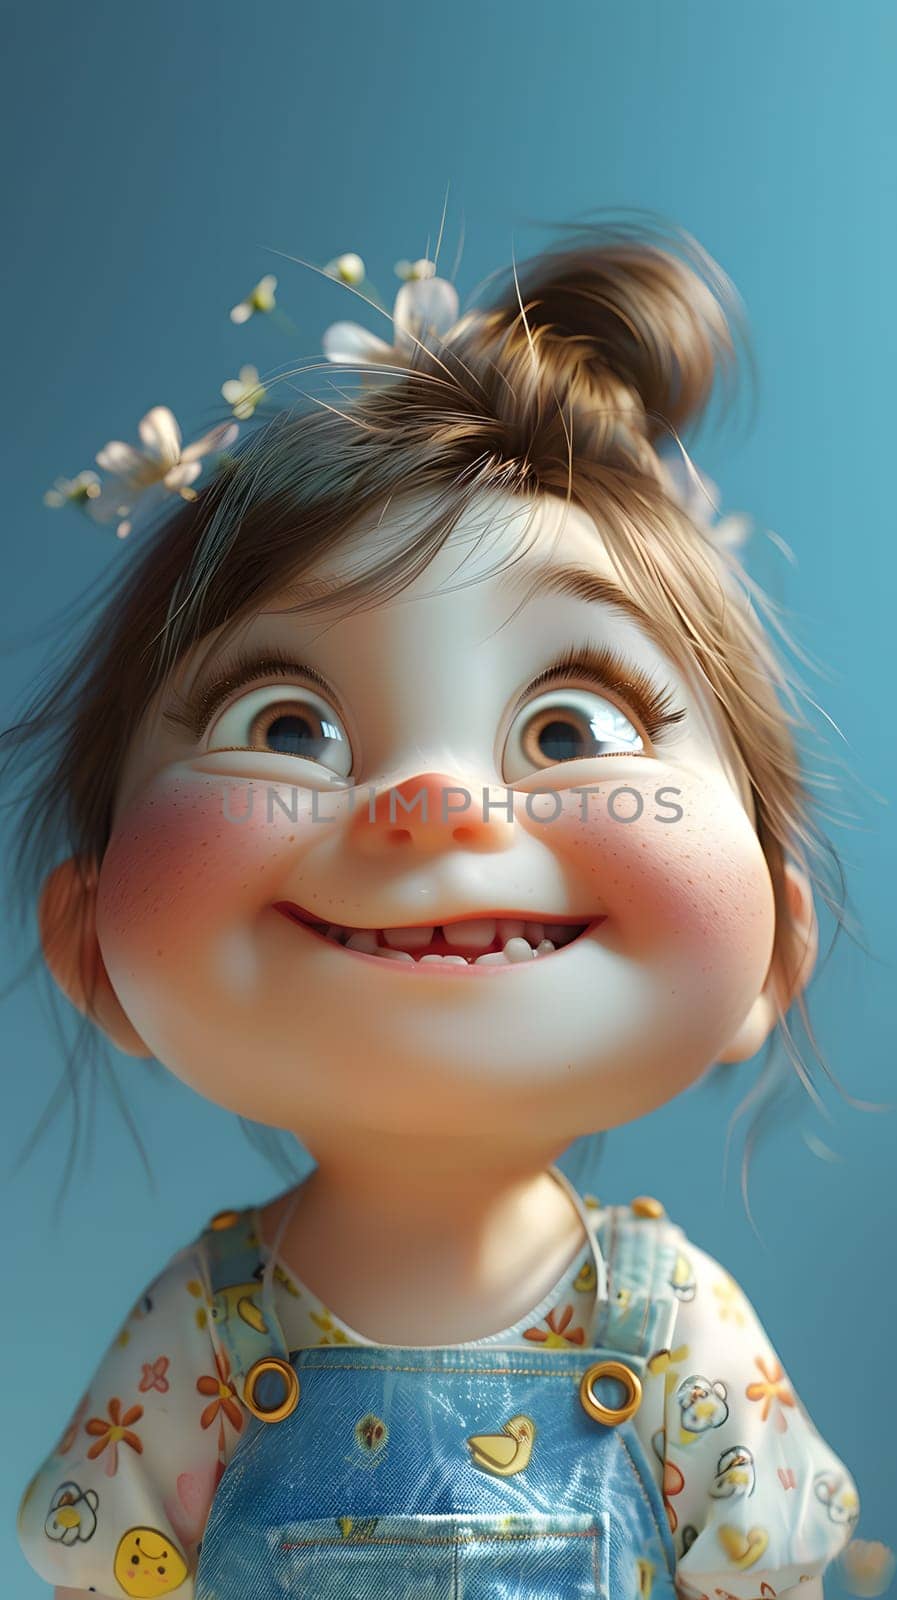 The toddler is happily smiling with flowers in her hair, wearing overalls. Her cheeks are rosy, and her eyes are sparkling with joy